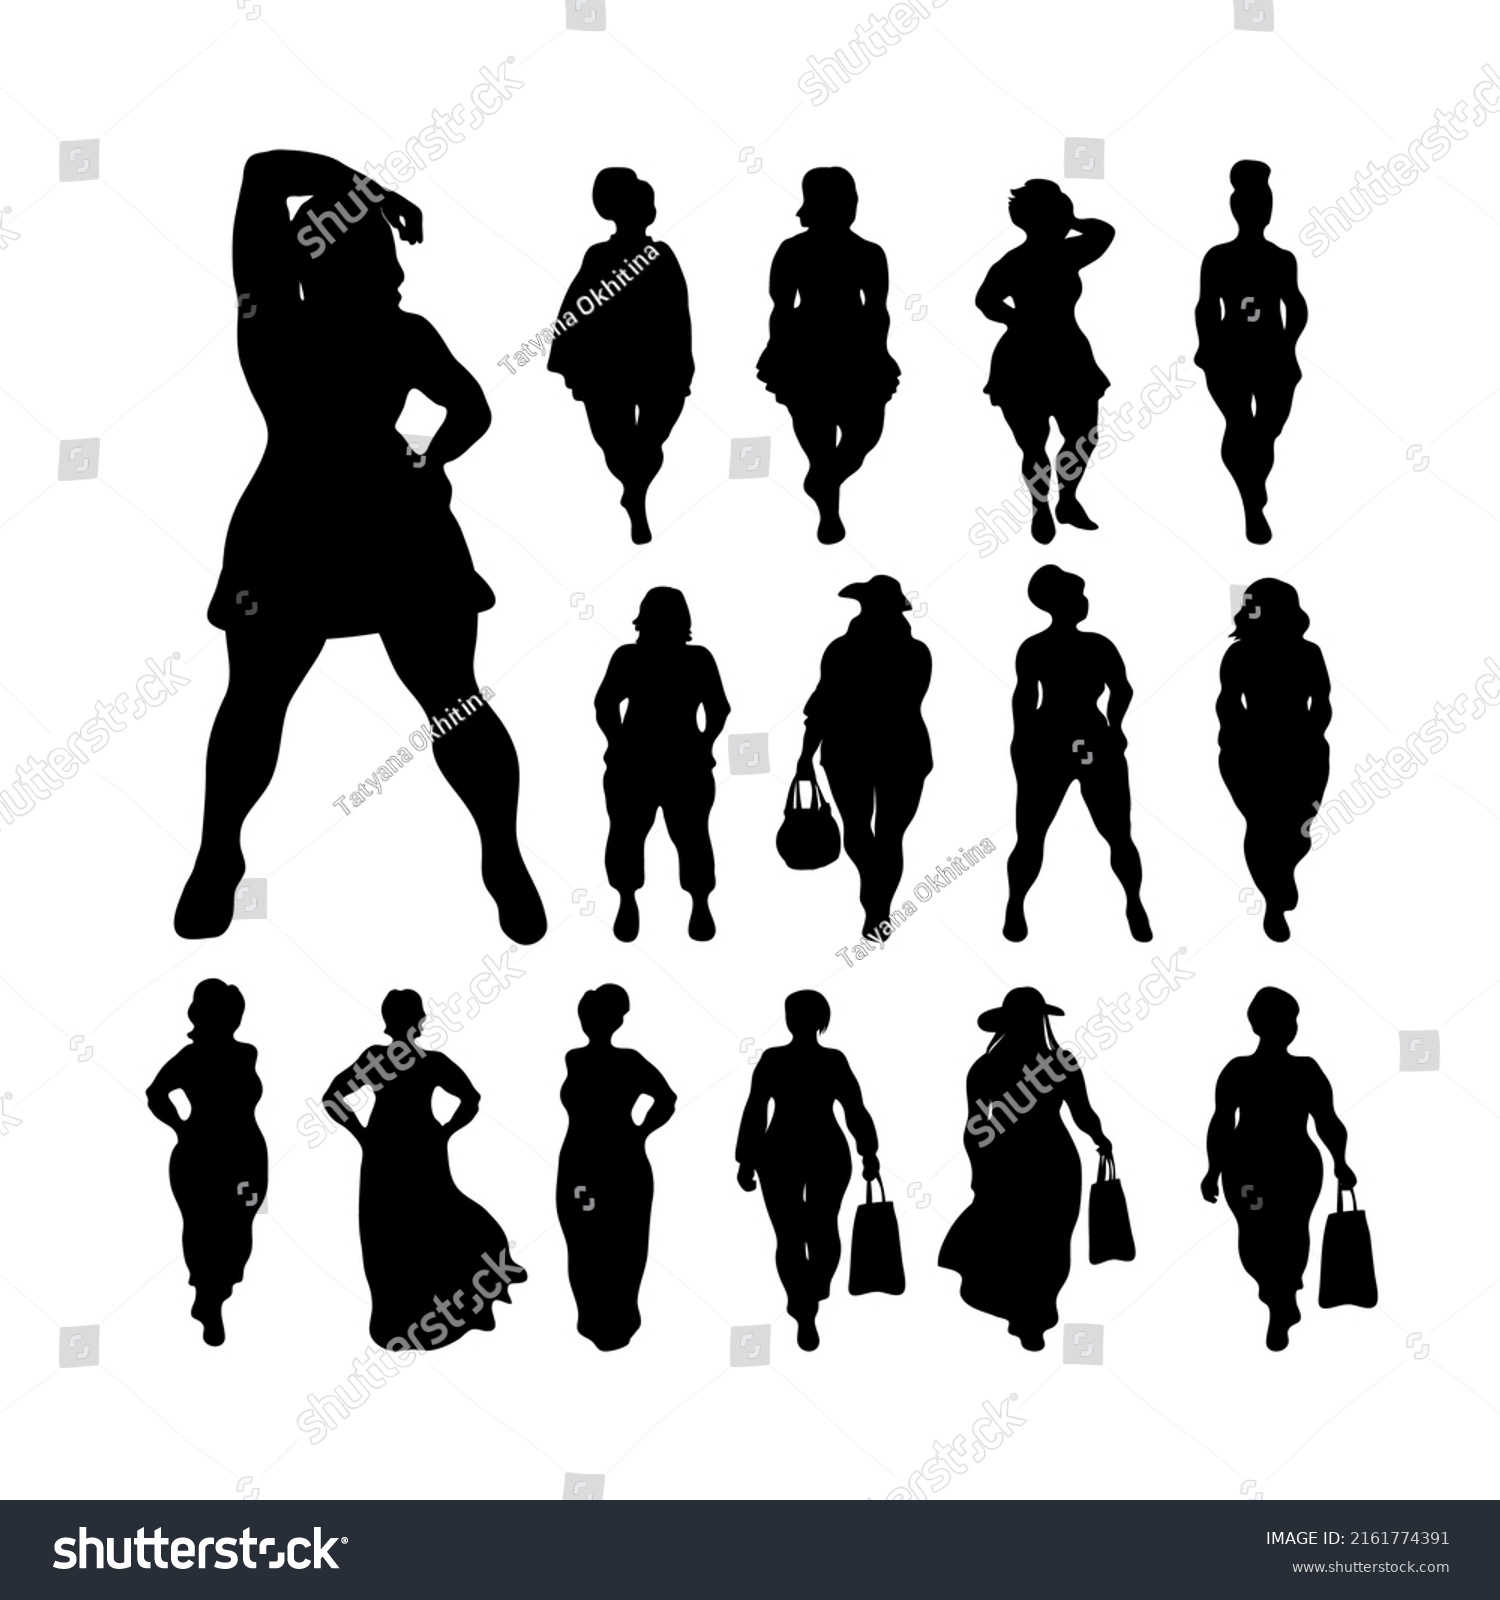 Body positive fashion woman silhouettes collection isolated on white background. Vector illustration plus-size models for fashion booklet, leaflet, poster. #2161774391